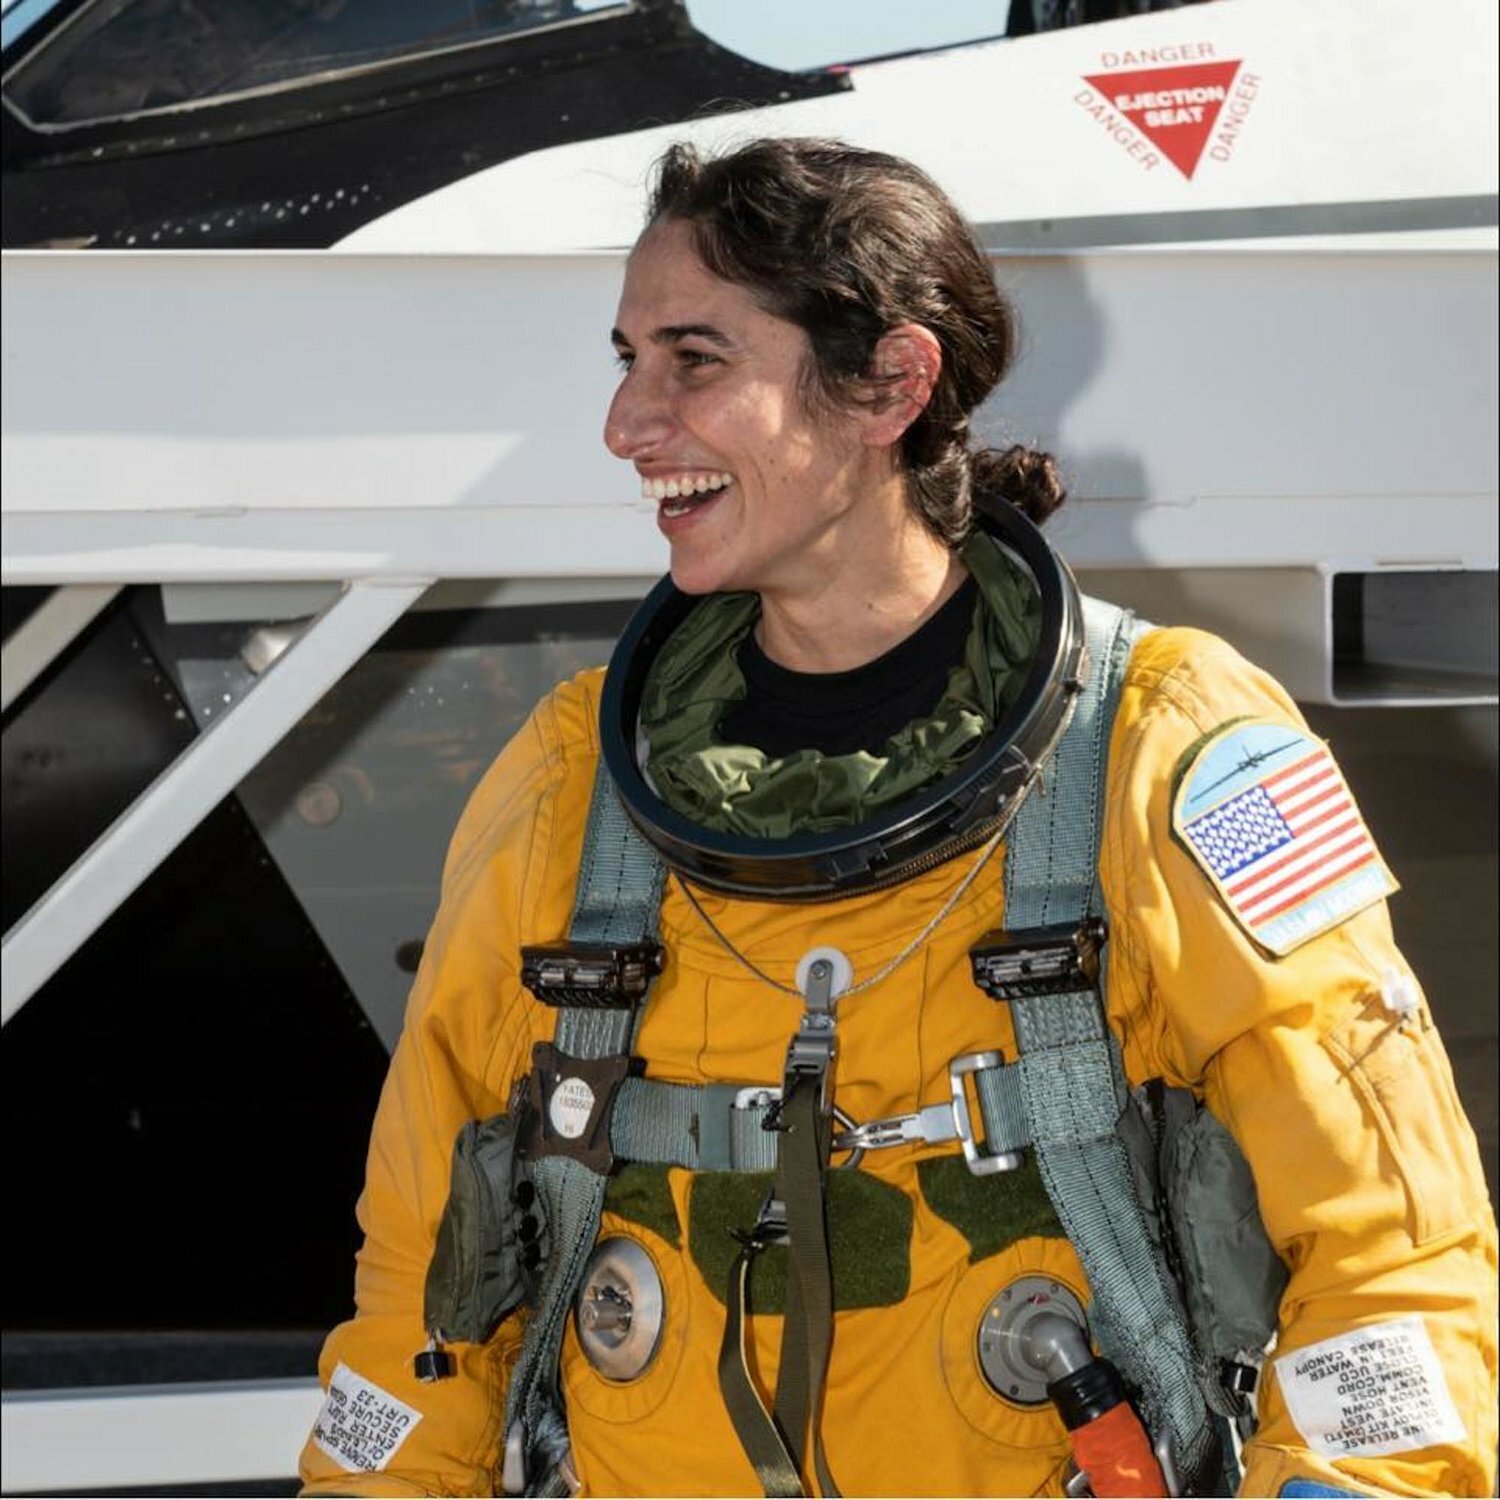 Jasmin Moghbeli is an astronaut from Baldwin, who recently went to space on SpaceX Crew-7.